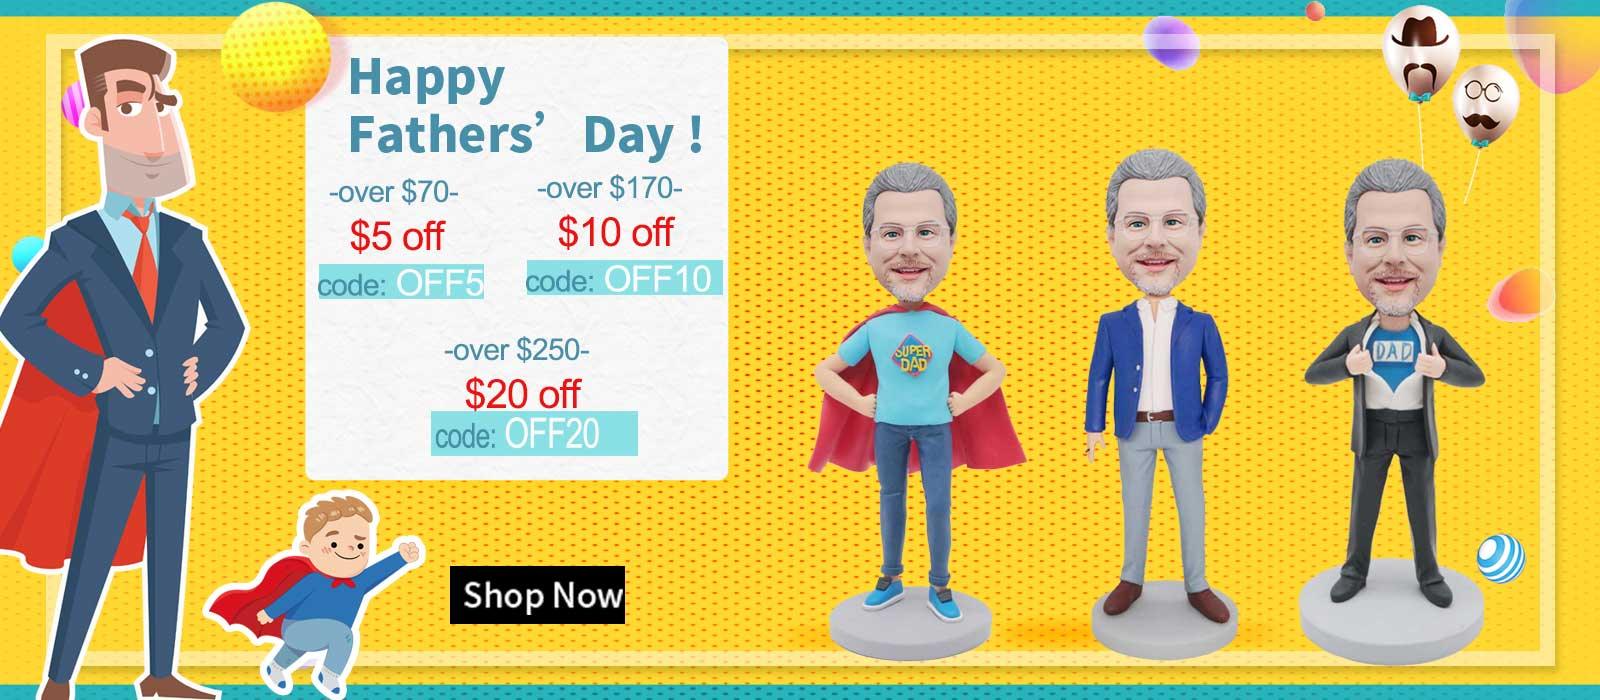 Custom Dad Bobbleheads As 2022 Creative Father's Day Gifts - Figure Bobblehead